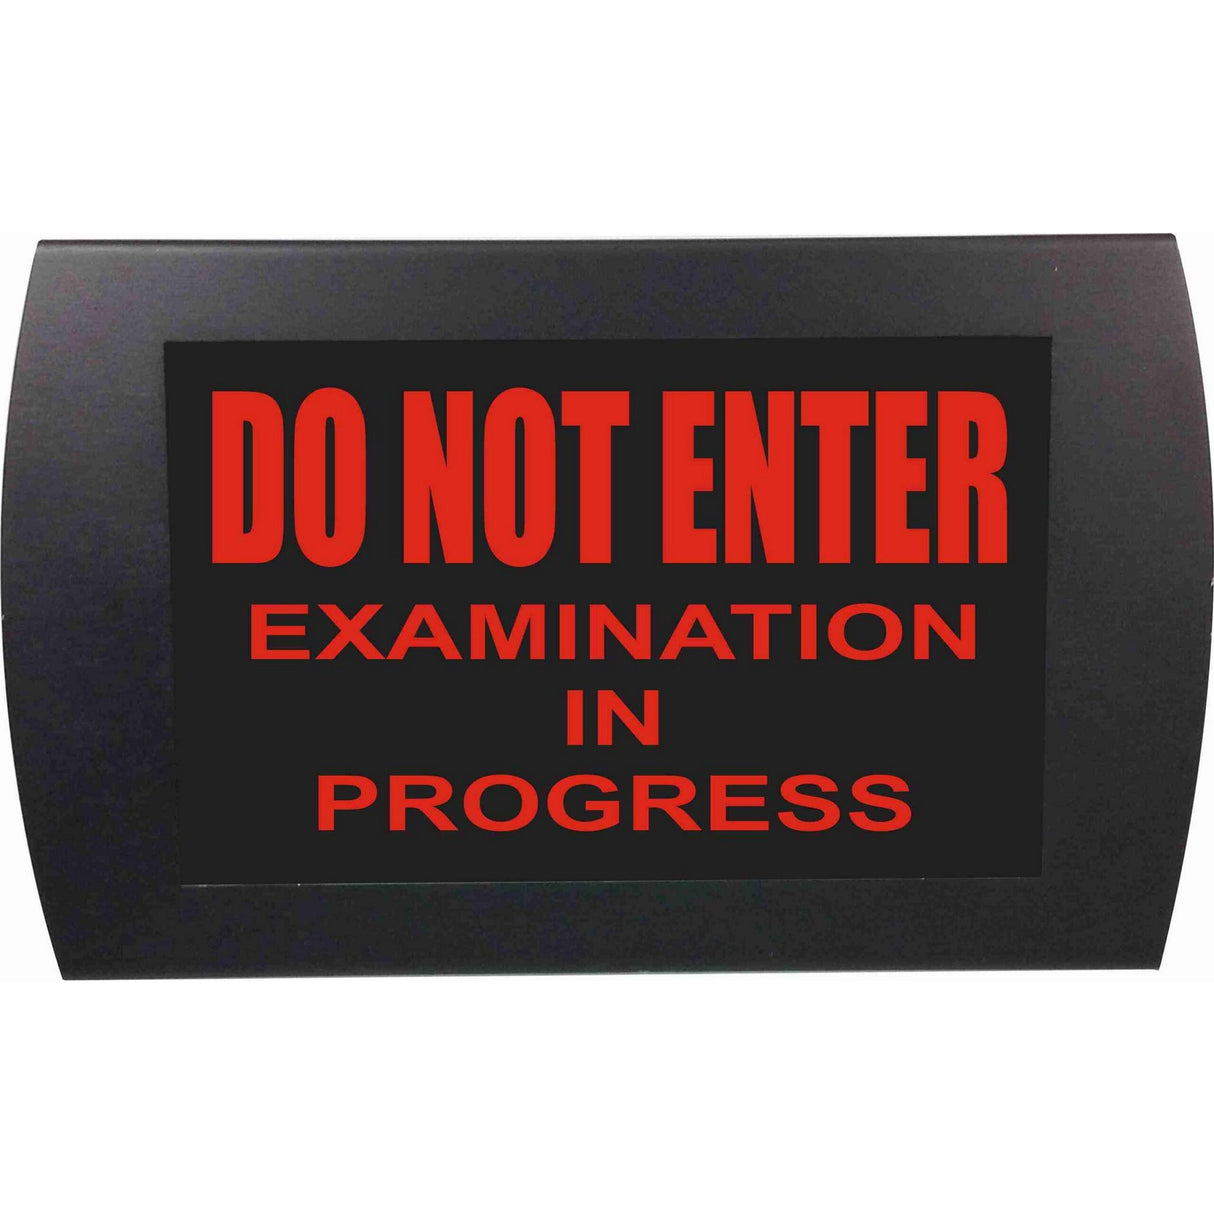 American Recorder OAS-2027M-RD "DO NOT ENTER - EXAMINATION IN PROGRESS" LED Lighted Sign, Red